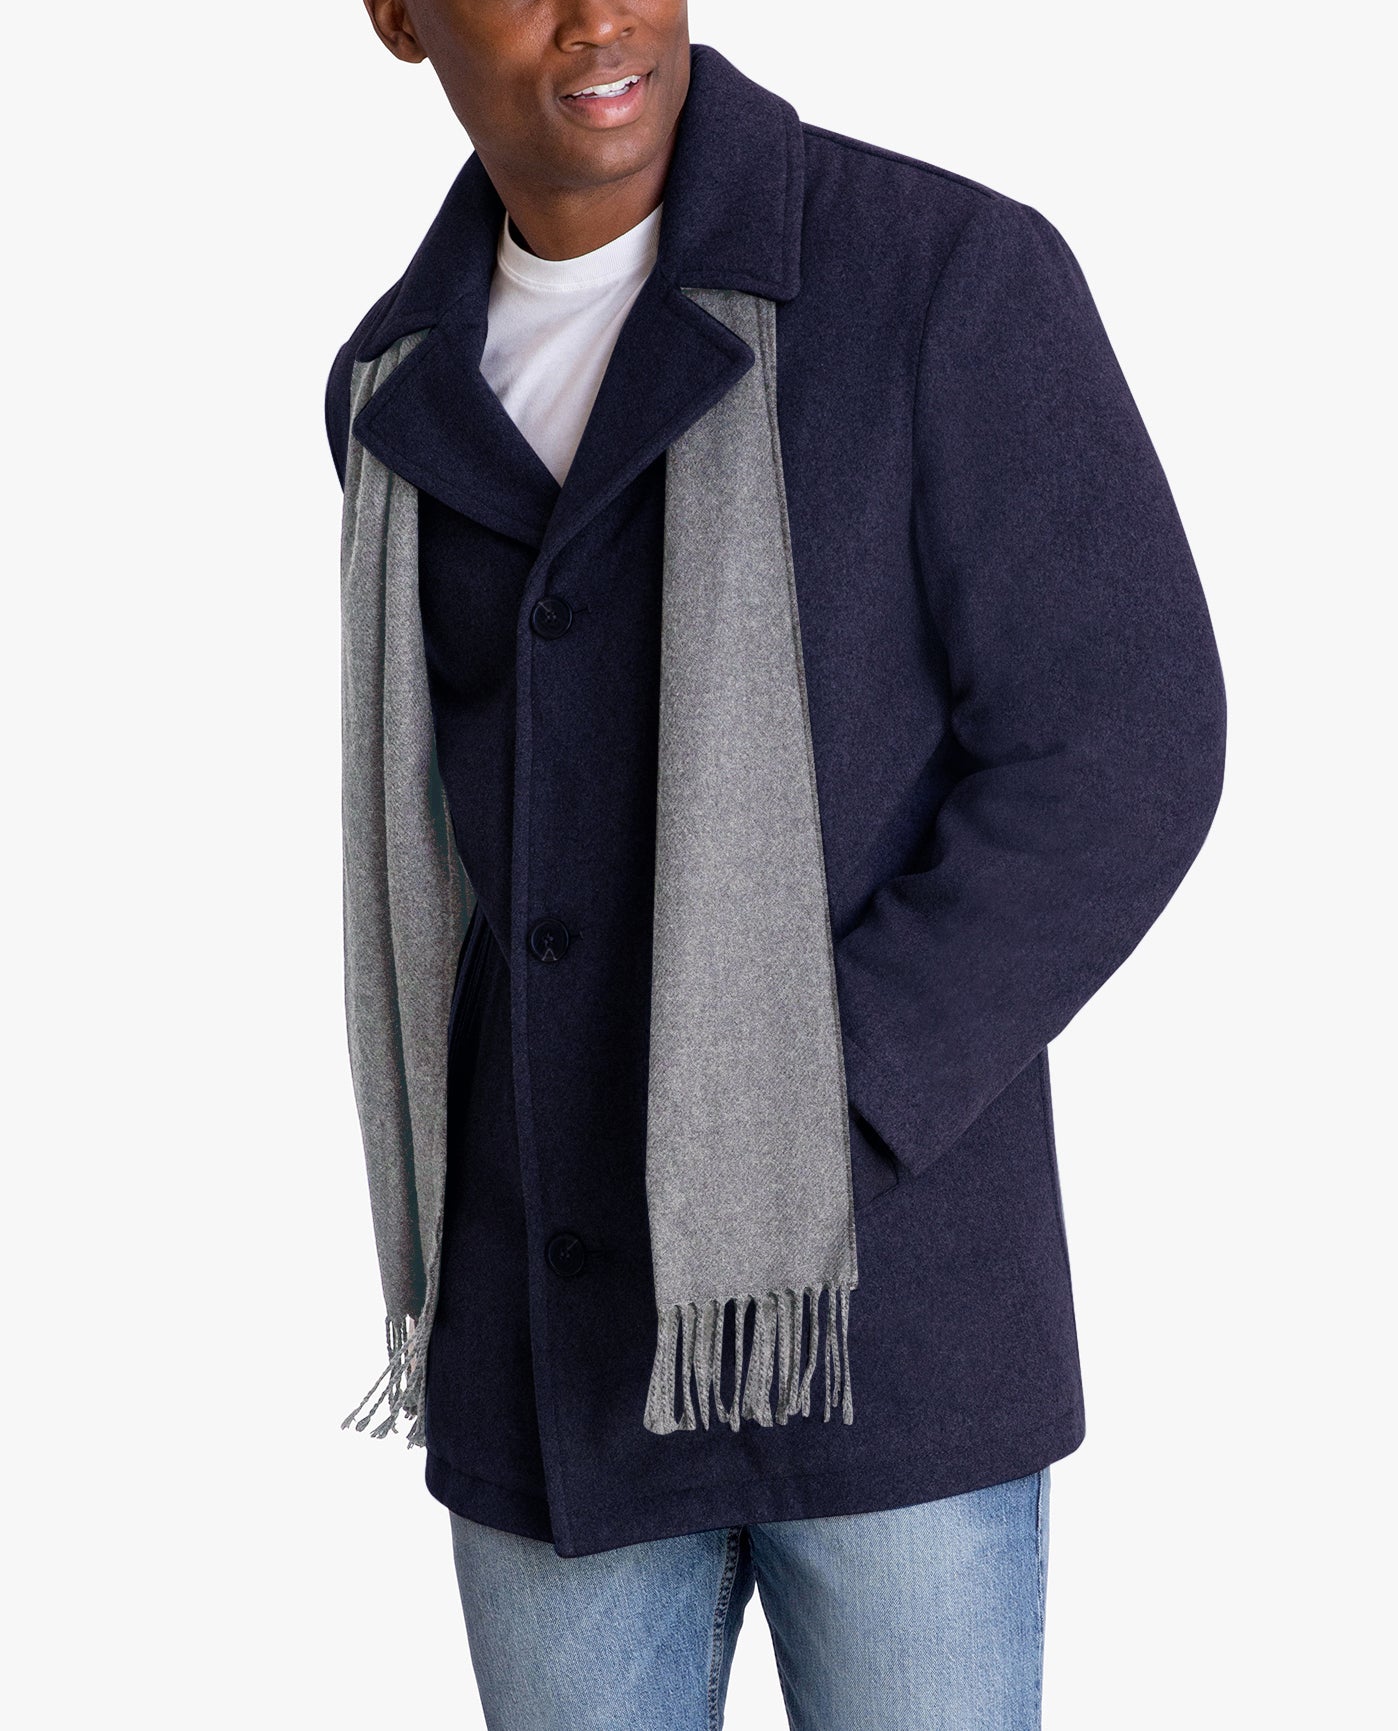 SIDE VIEW OF AMITY SINGLE BREASTED WOOL JACKET | NAVY HEATHER